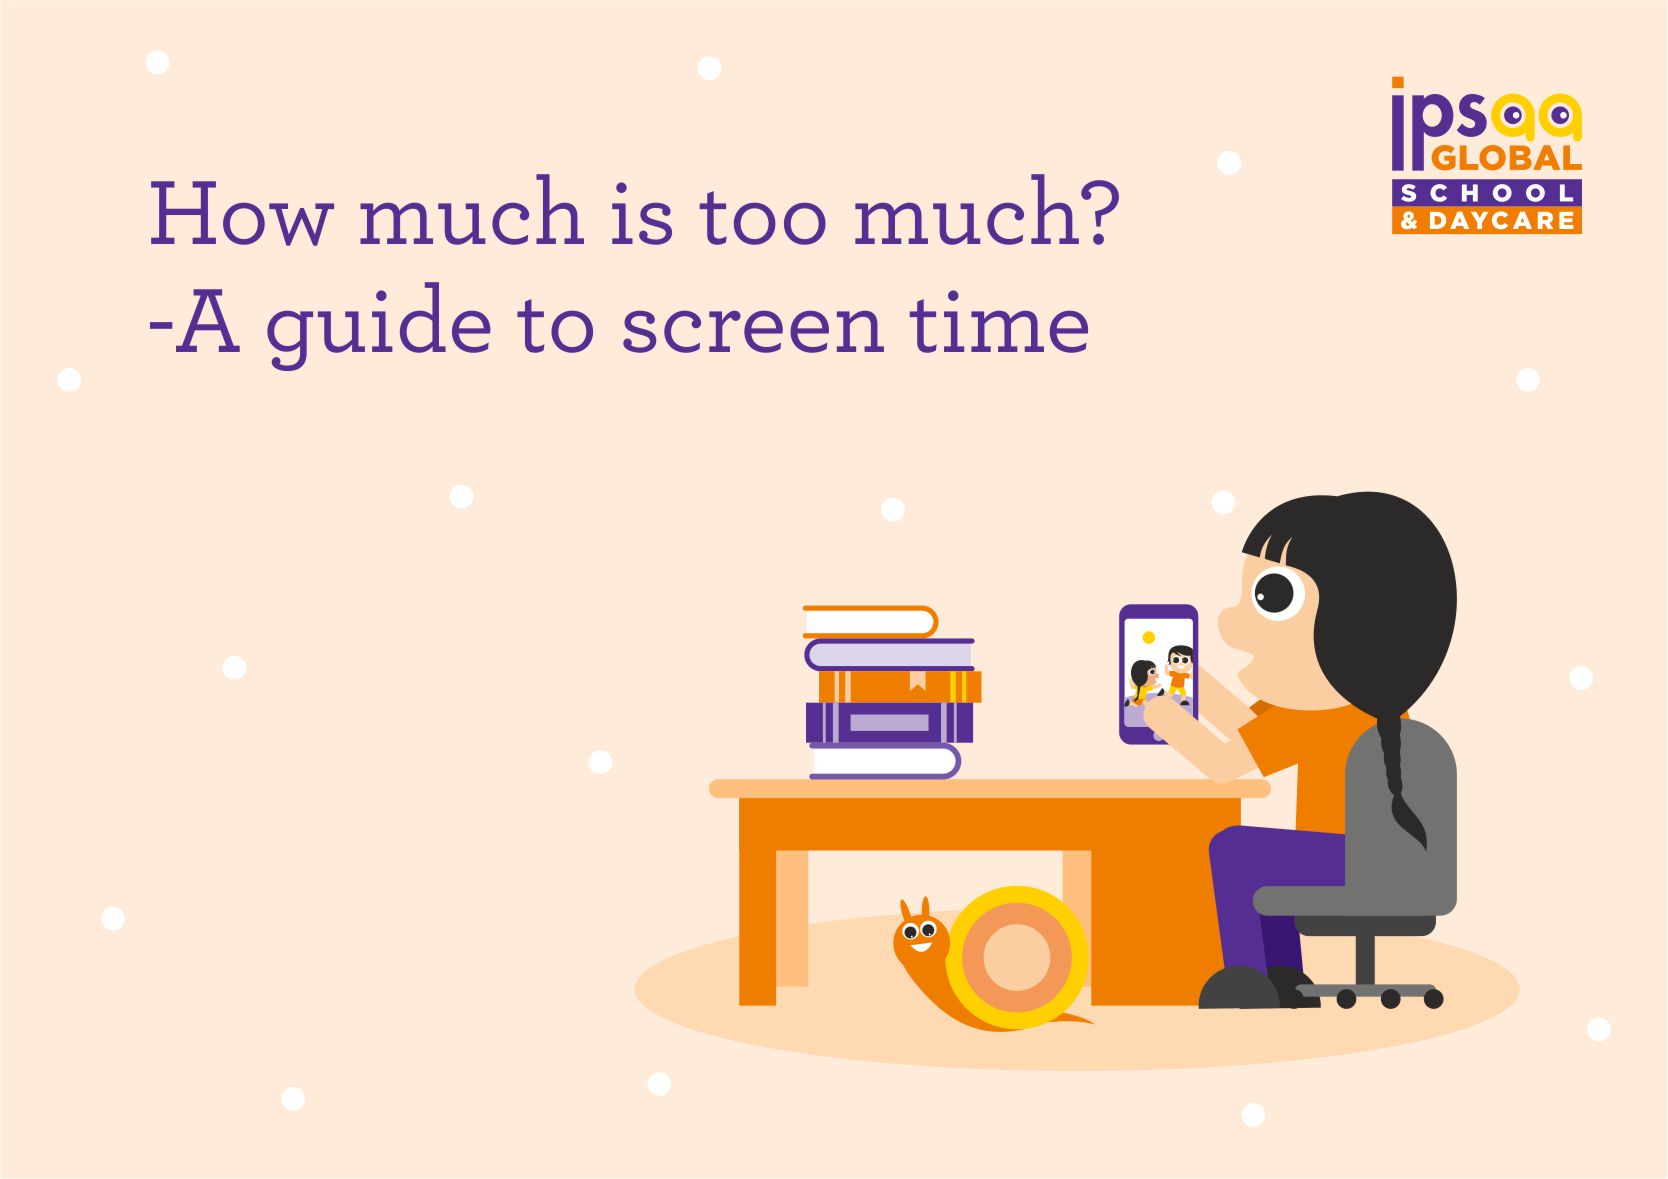 How much is too much? – A guide to screen time